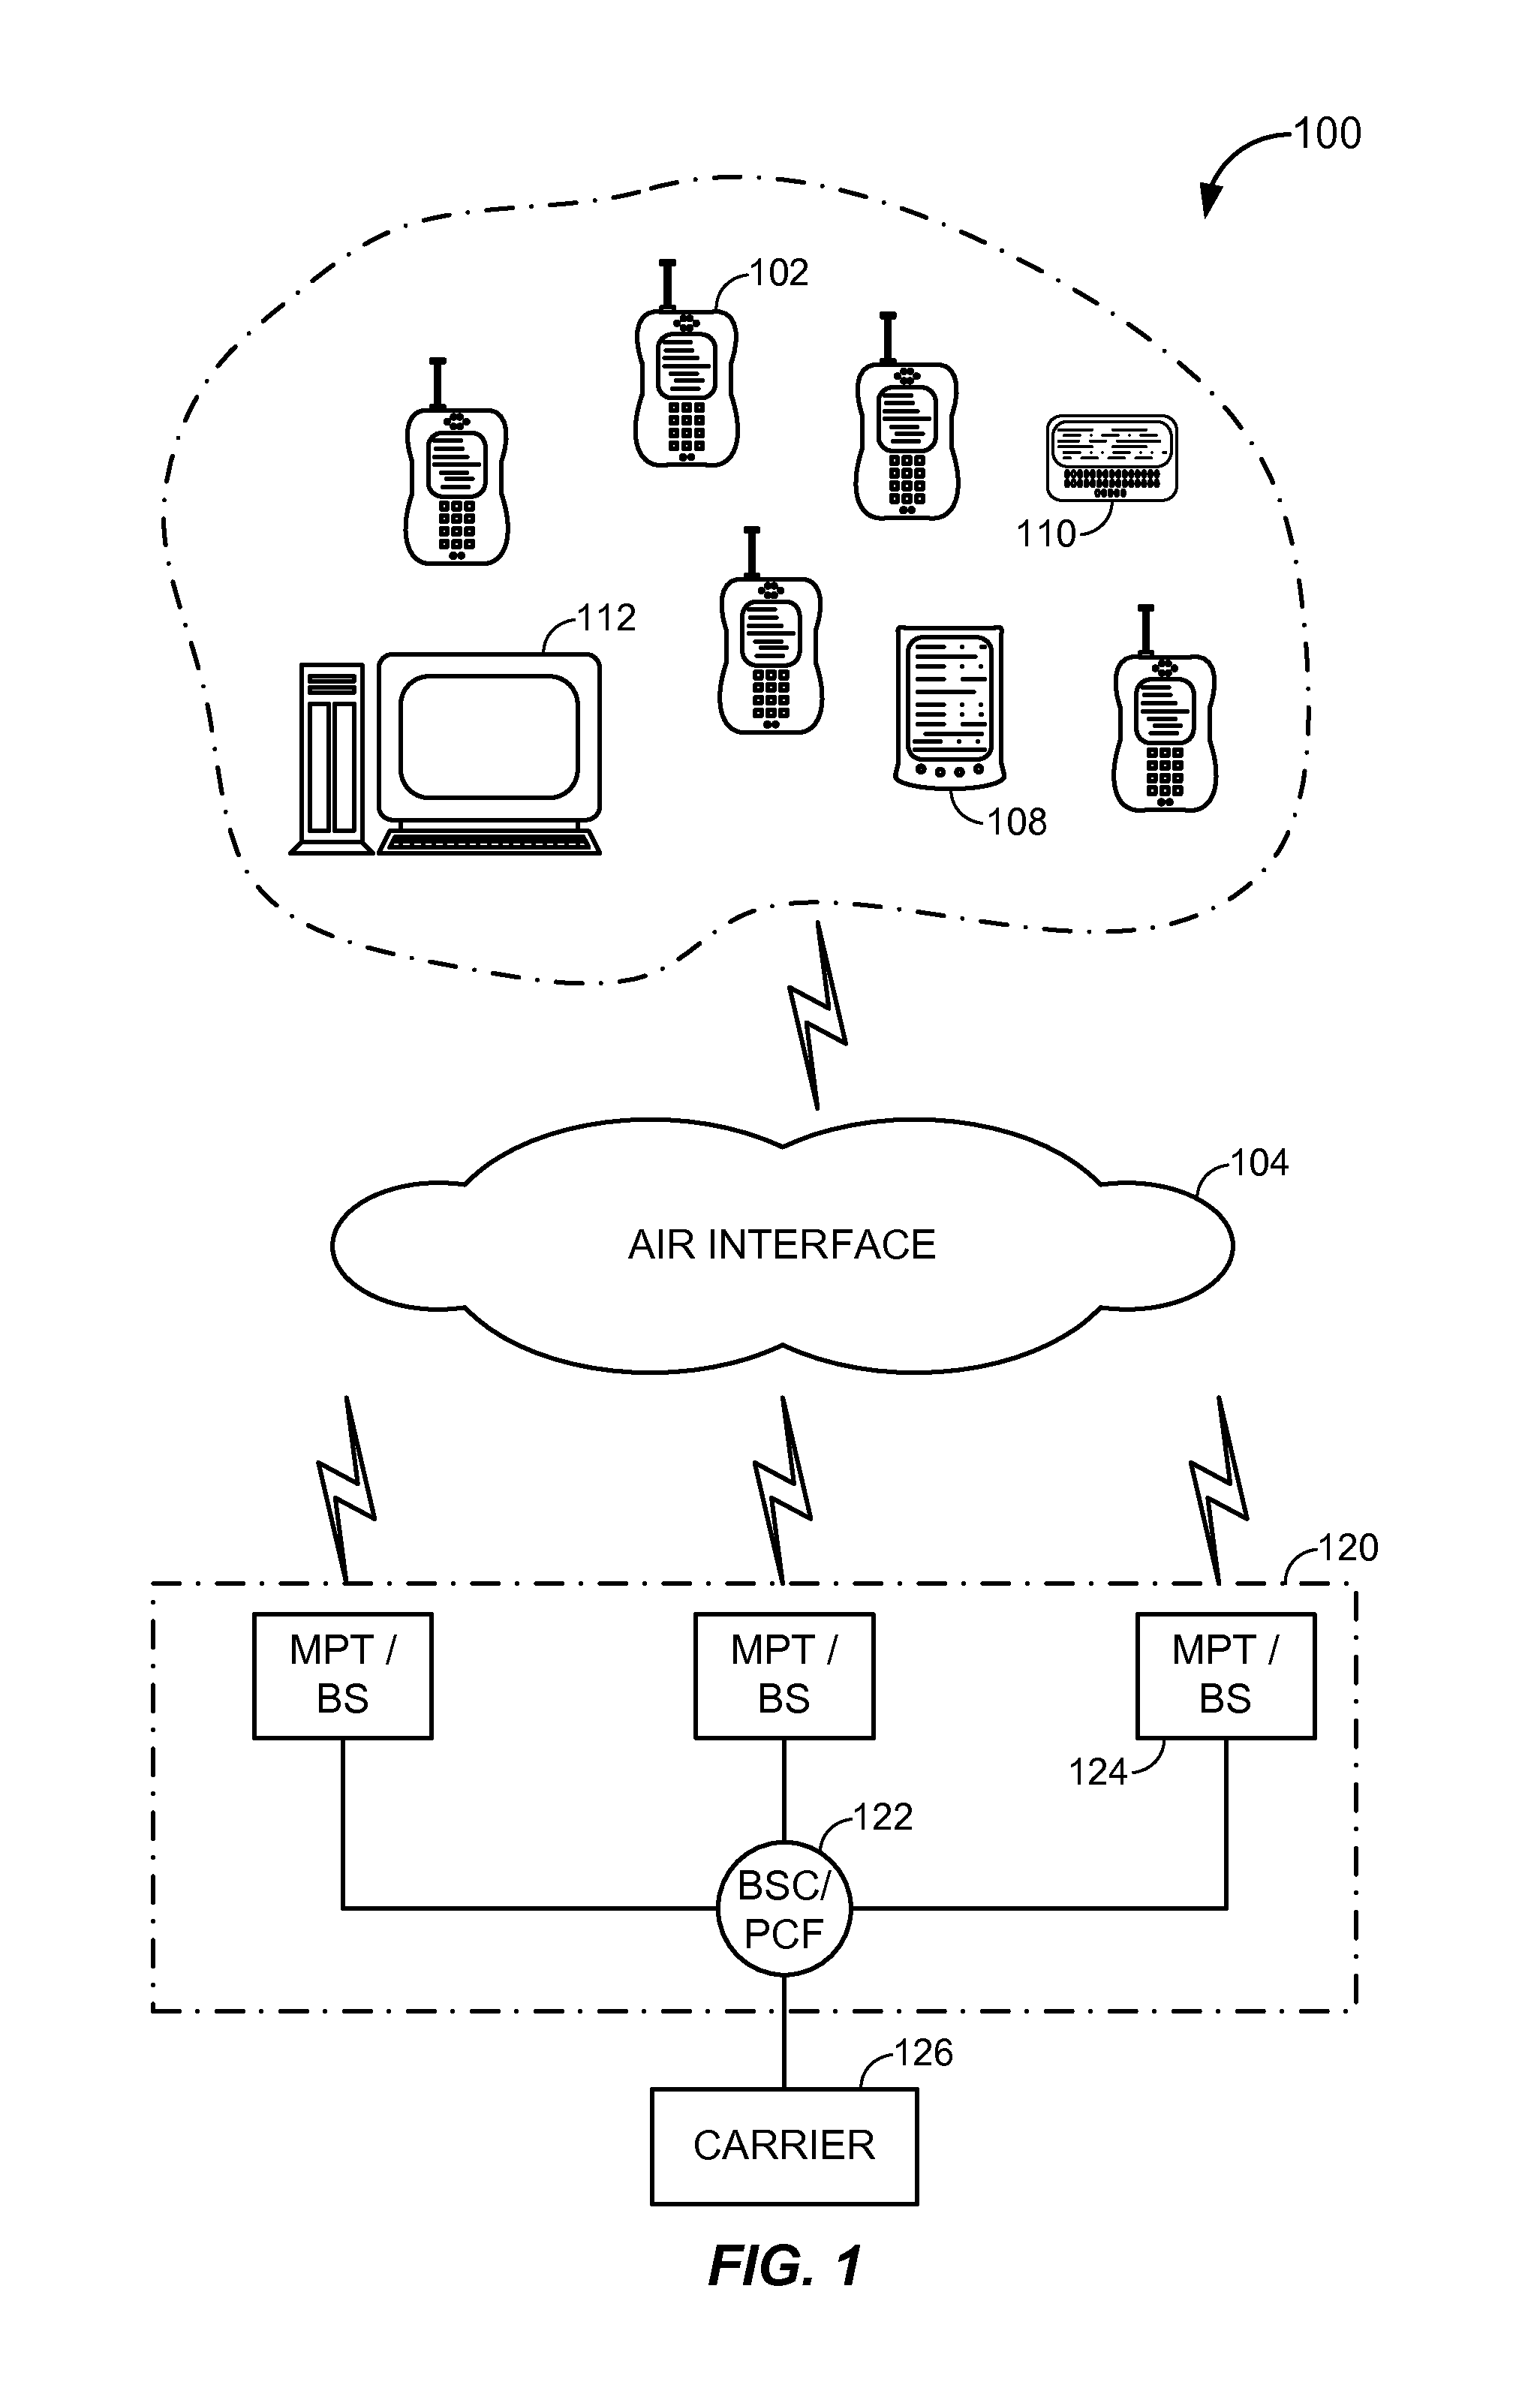 Group communication sessions in a wireless communications system